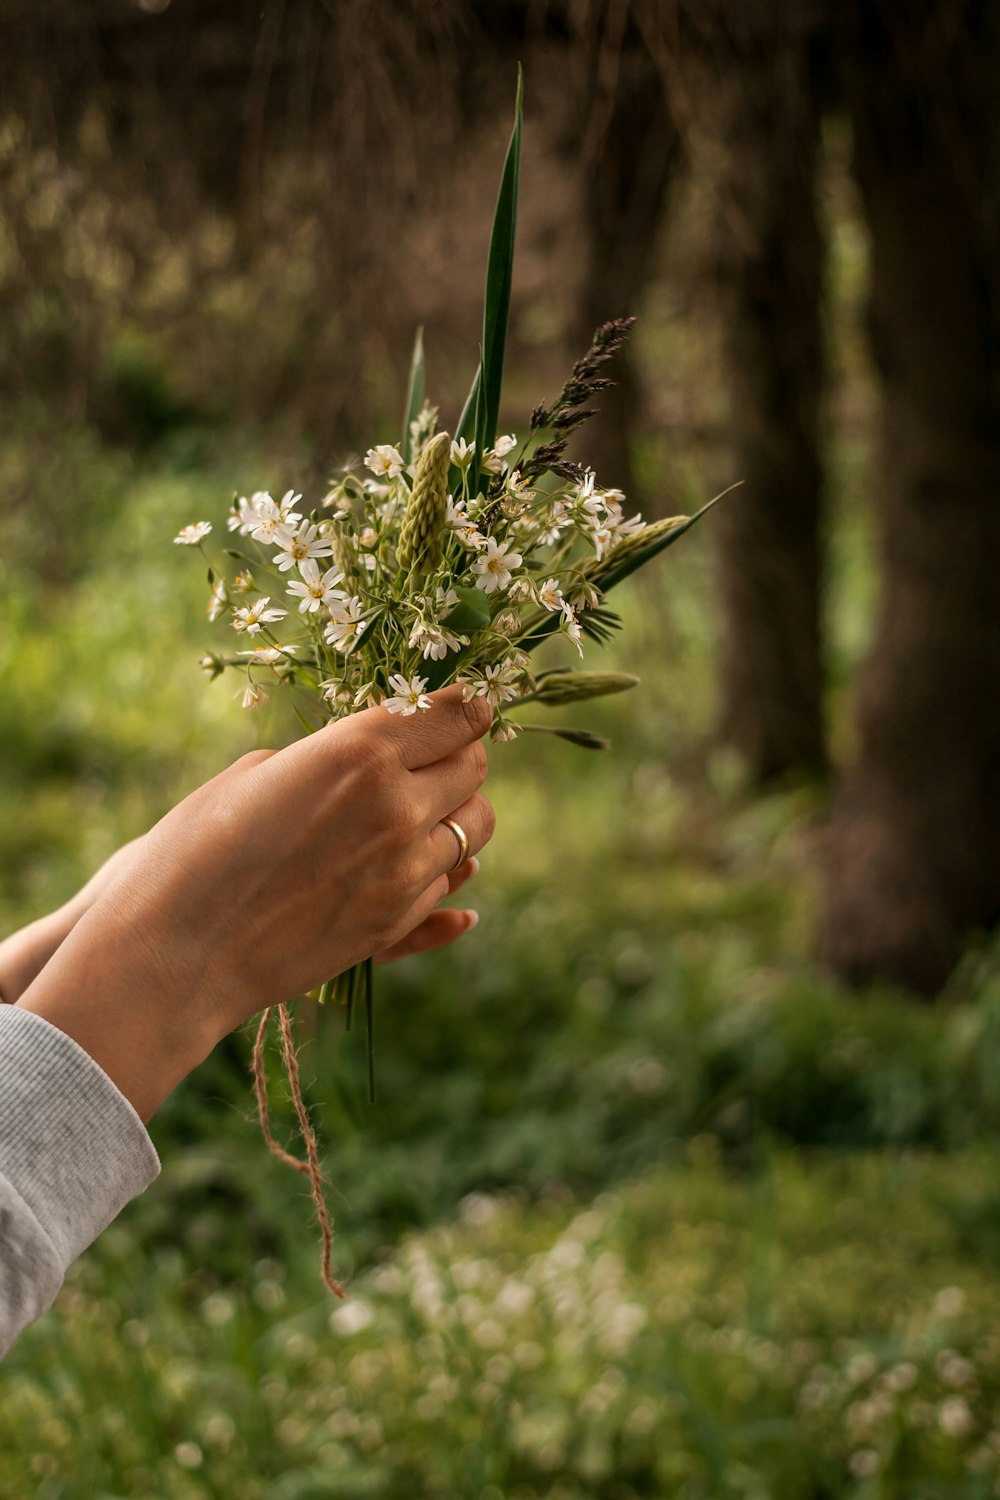 person holding white flower during daytime